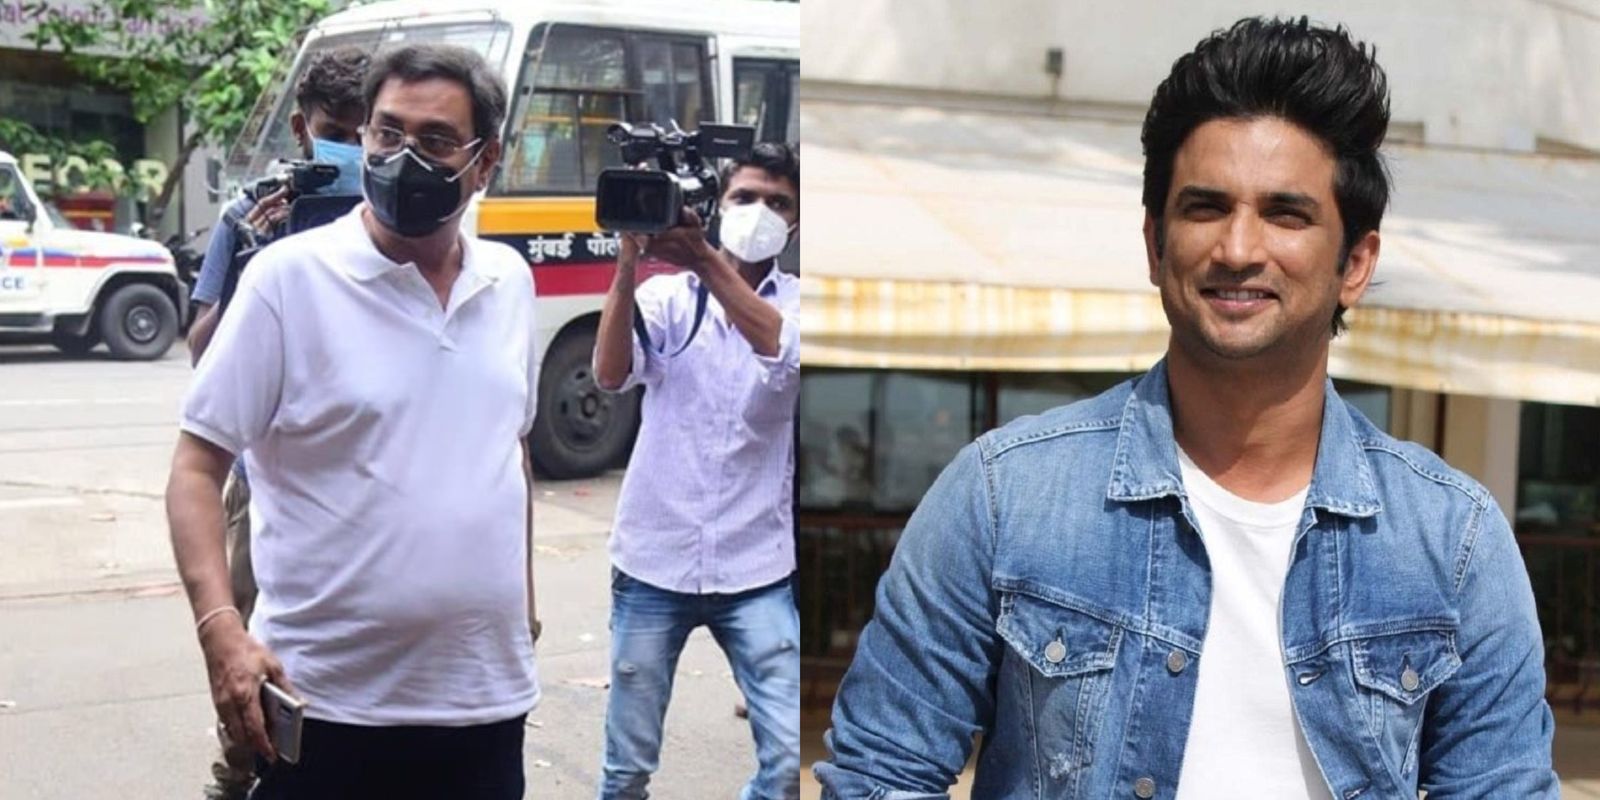 Rumi Jafry Questioned About Sushant Singh Rajput And Their Film Says ‘Happy Cops Are Doing Thorough Investigation’